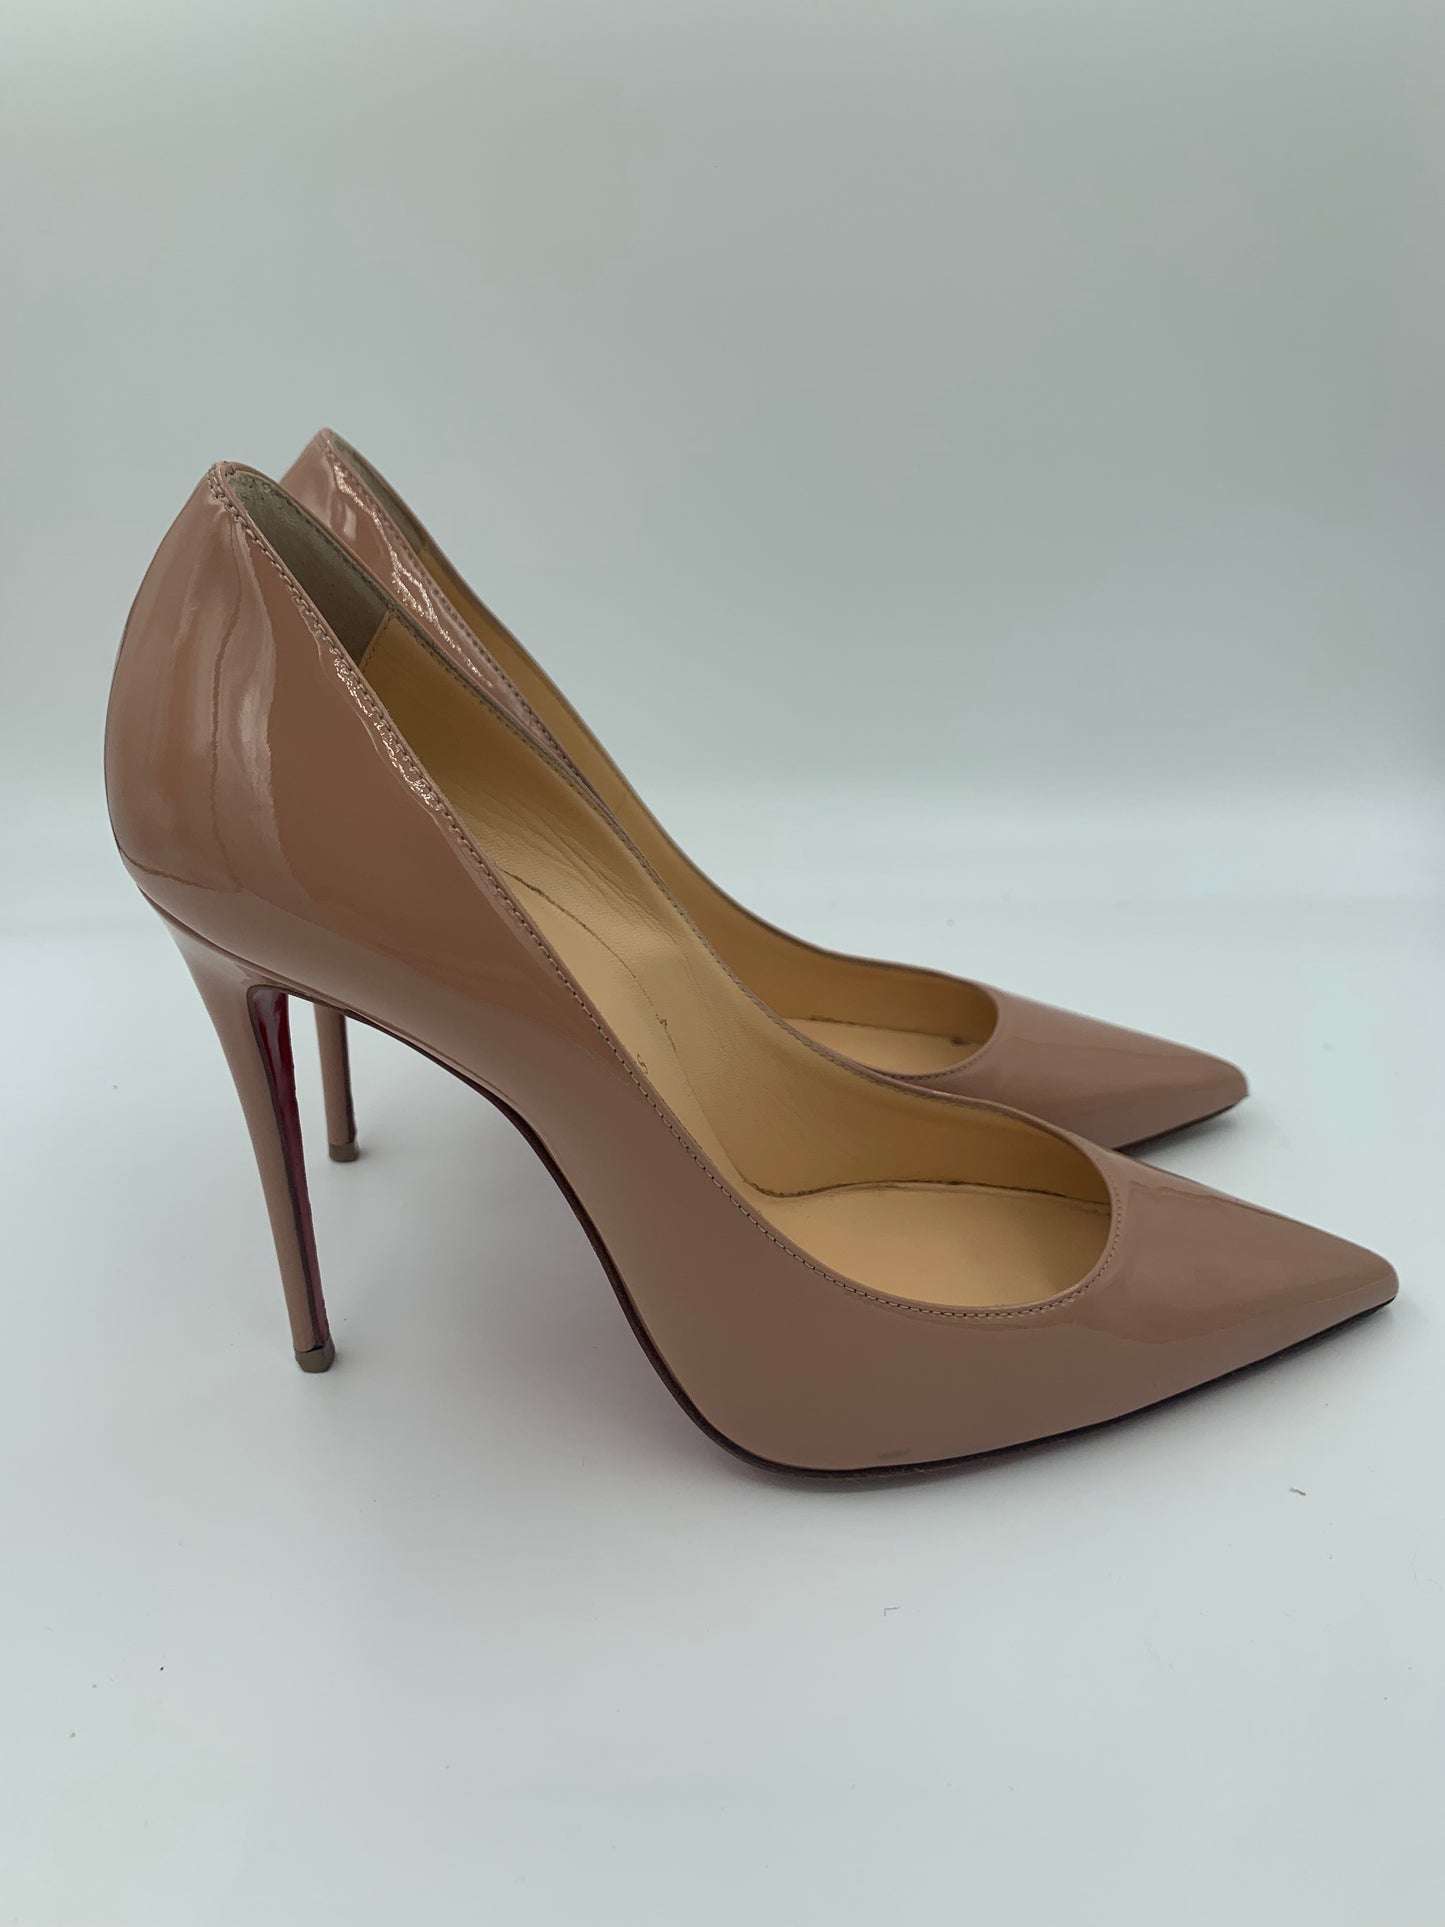 Christian Louboutin Nude Patent Leather Heels